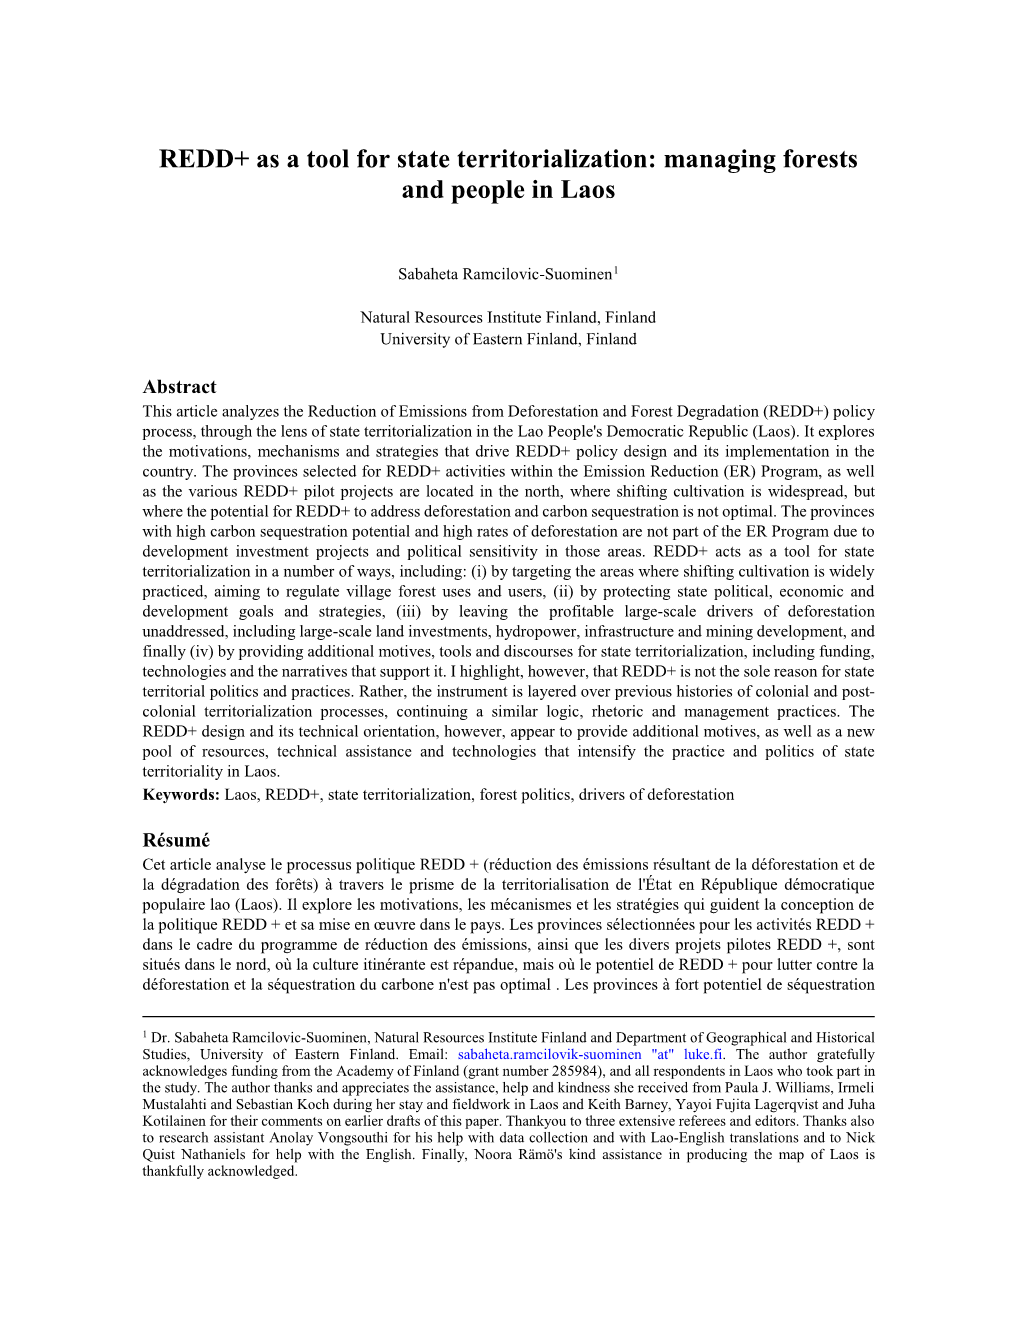 REDD+ As a Tool for State Territorialization: Managing Forests and People in Laos